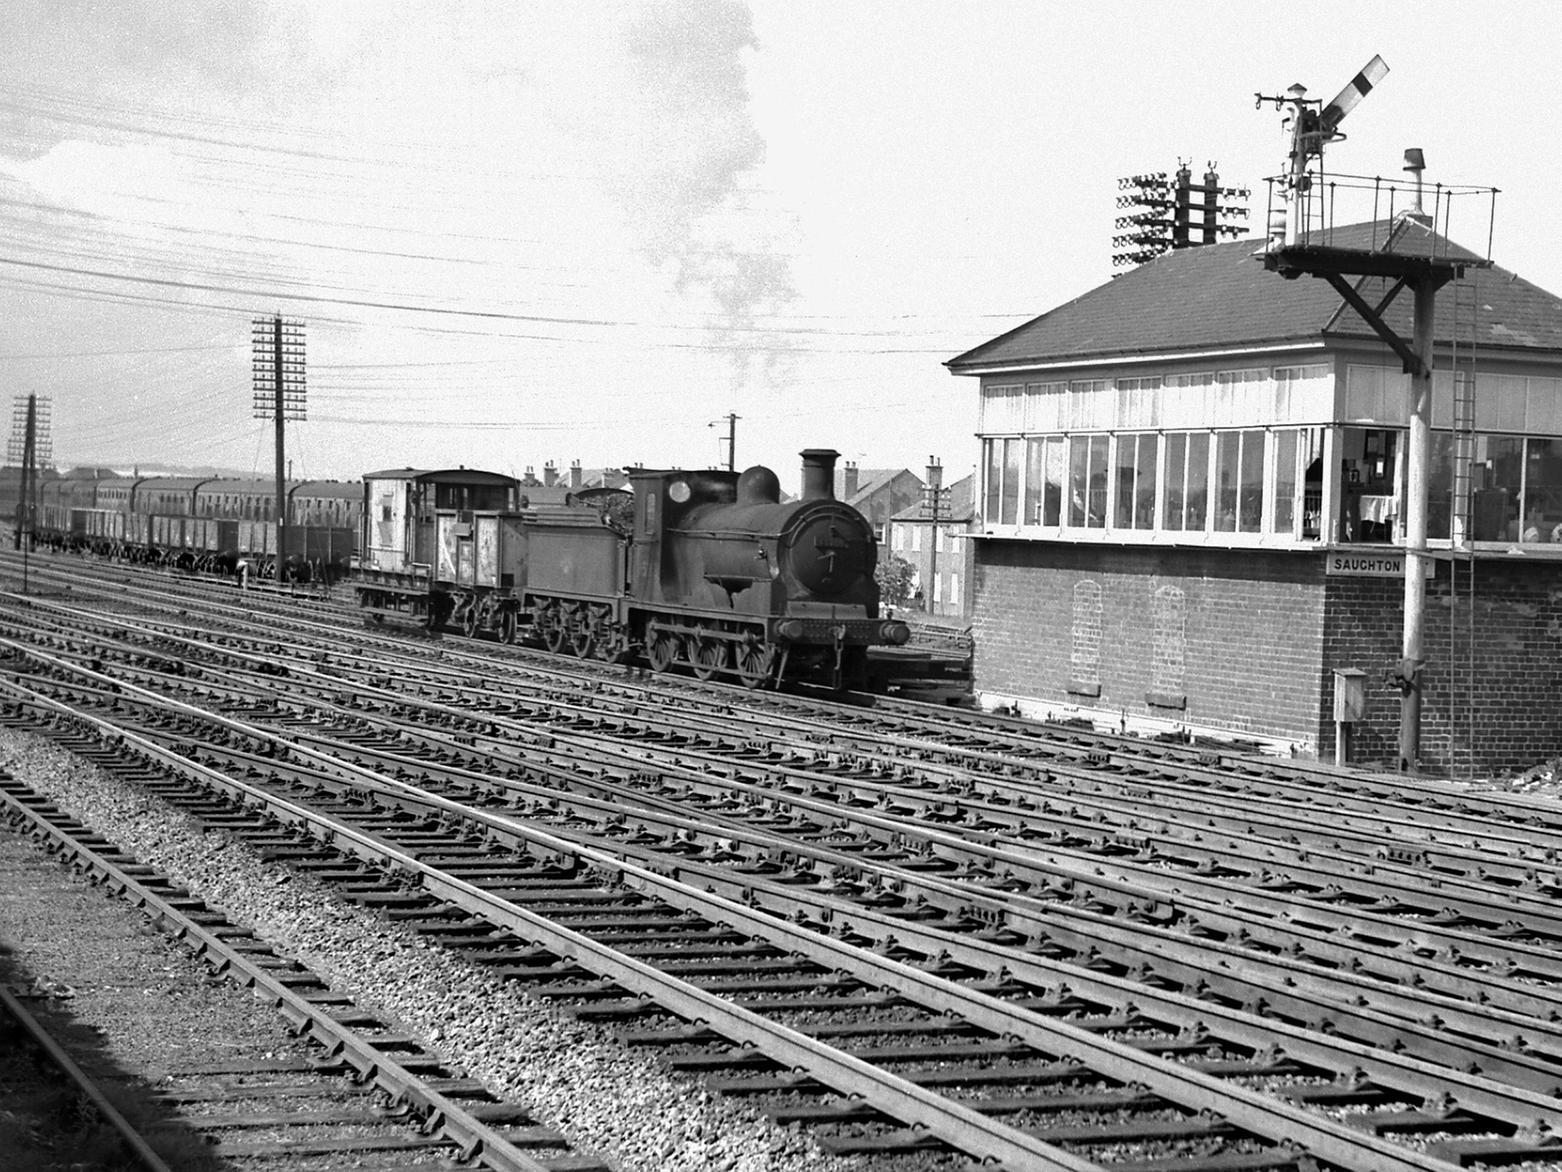 Class J36 No 65288 passes the signal box at Saughton in 1962 with a short freight train consisting of one mineral wagon and a brake van.